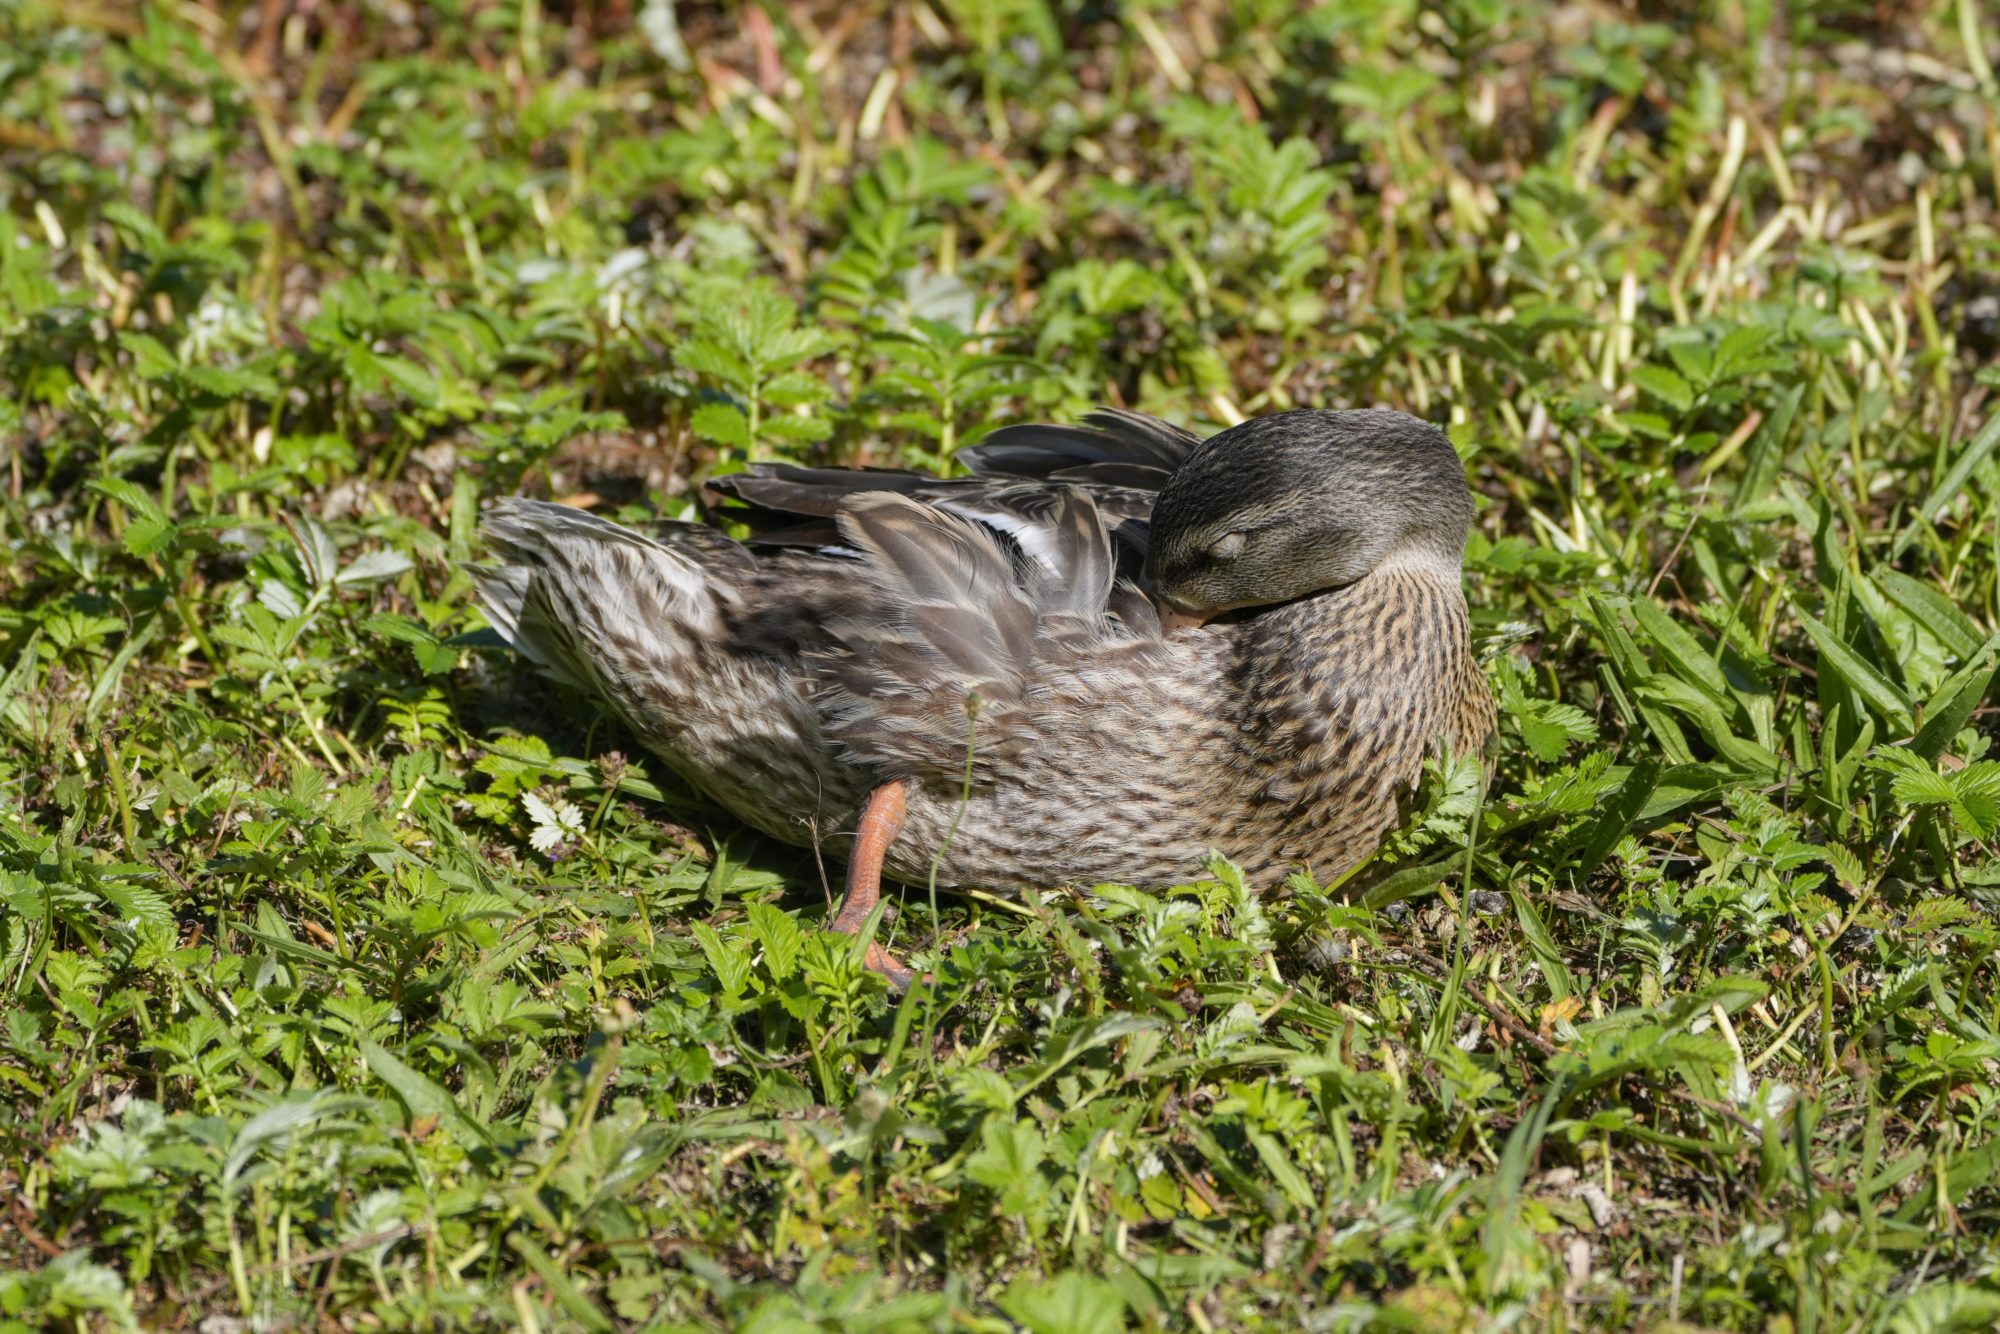 A female Mallard duck is napping in the grass